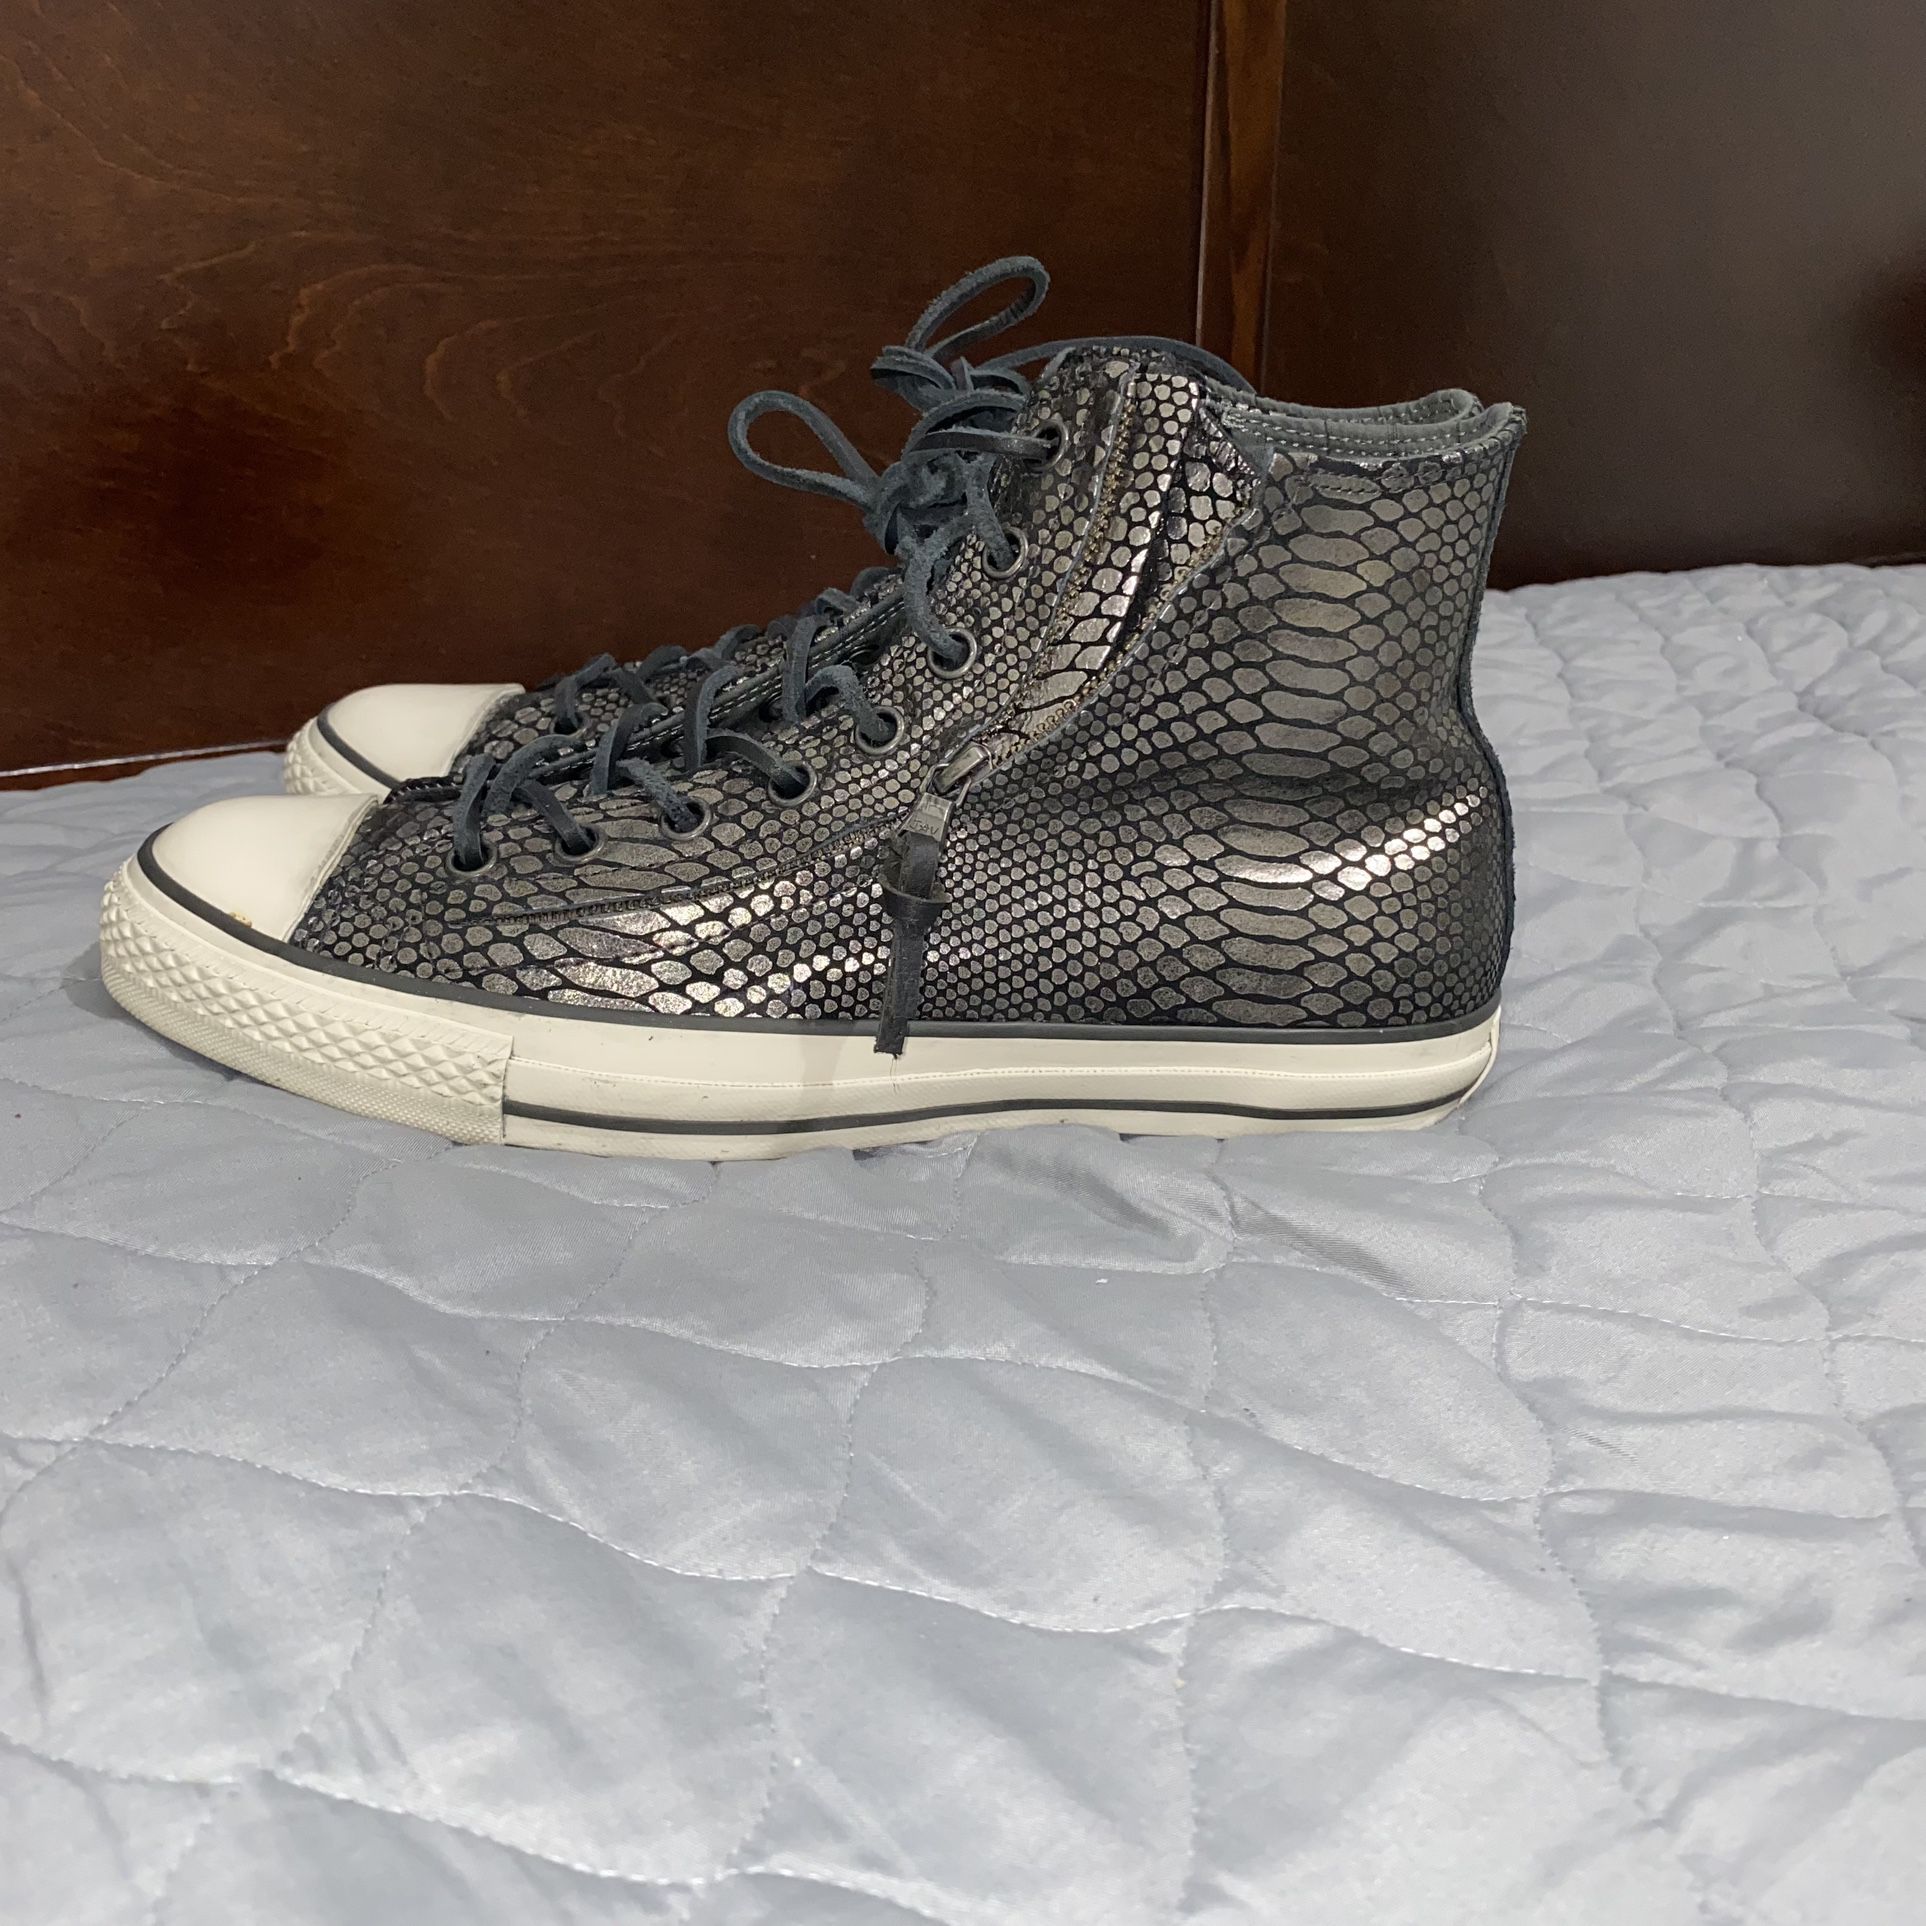 median ledningsfri dobbelt Converse Chuck Taylor All Star John Varvatos Silver & Black Snake Skin  Design Sneakers With Zippers And Full Lace Up!! SZ: Men's 10/Women's 12!  for Sale in El Paso, TX - OfferUp